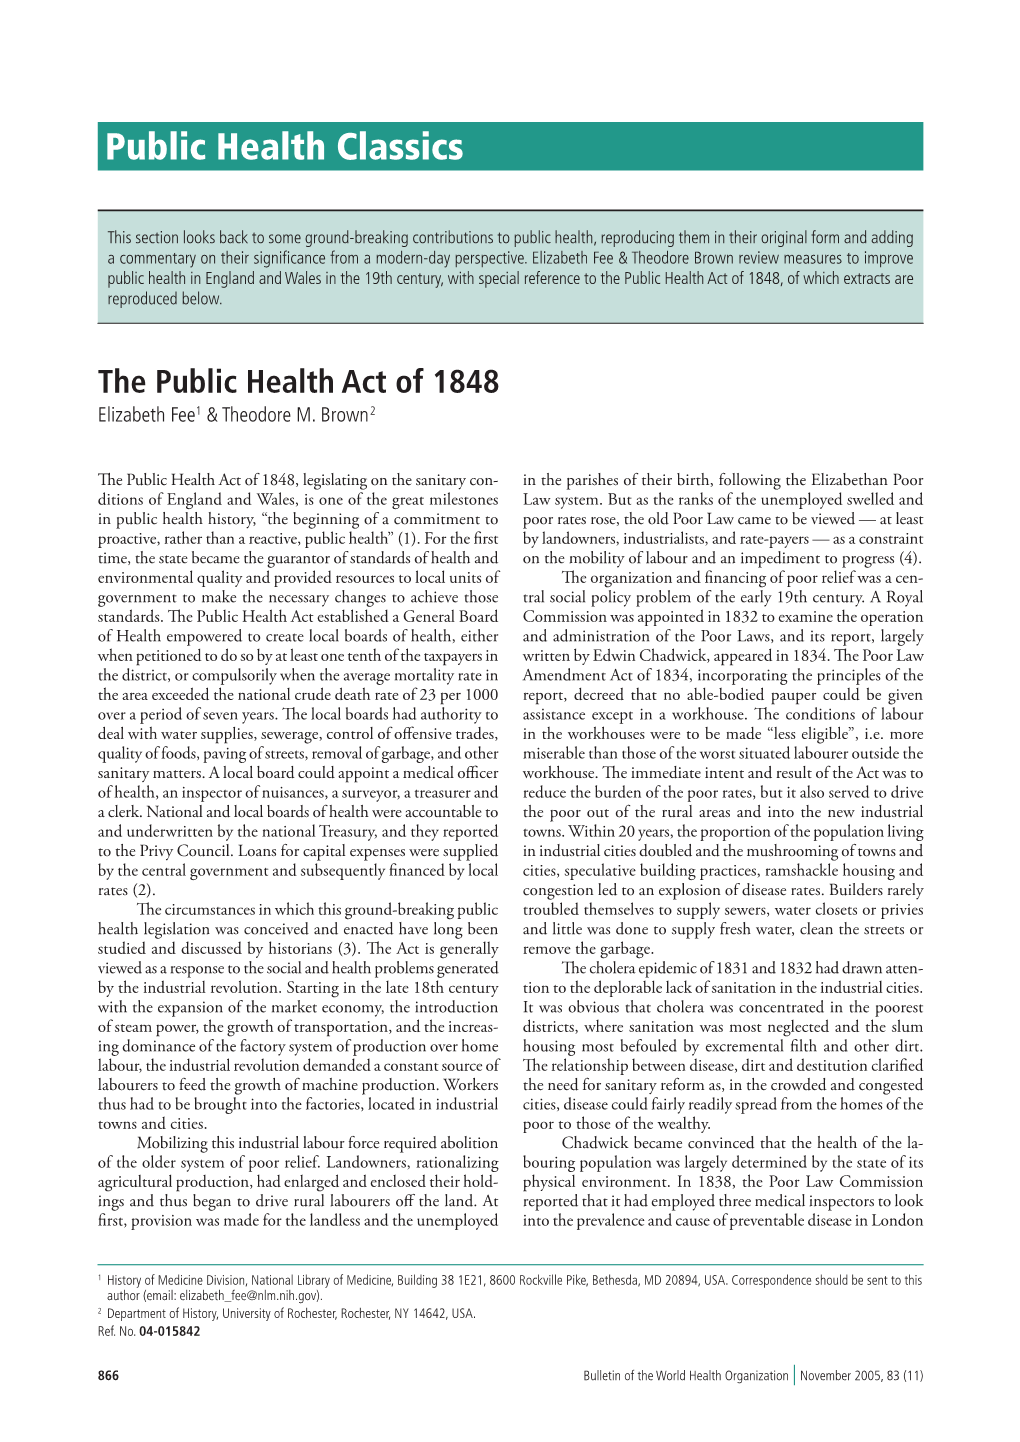 Public Health Act of 1848, of Which Extracts Are Reproduced Below